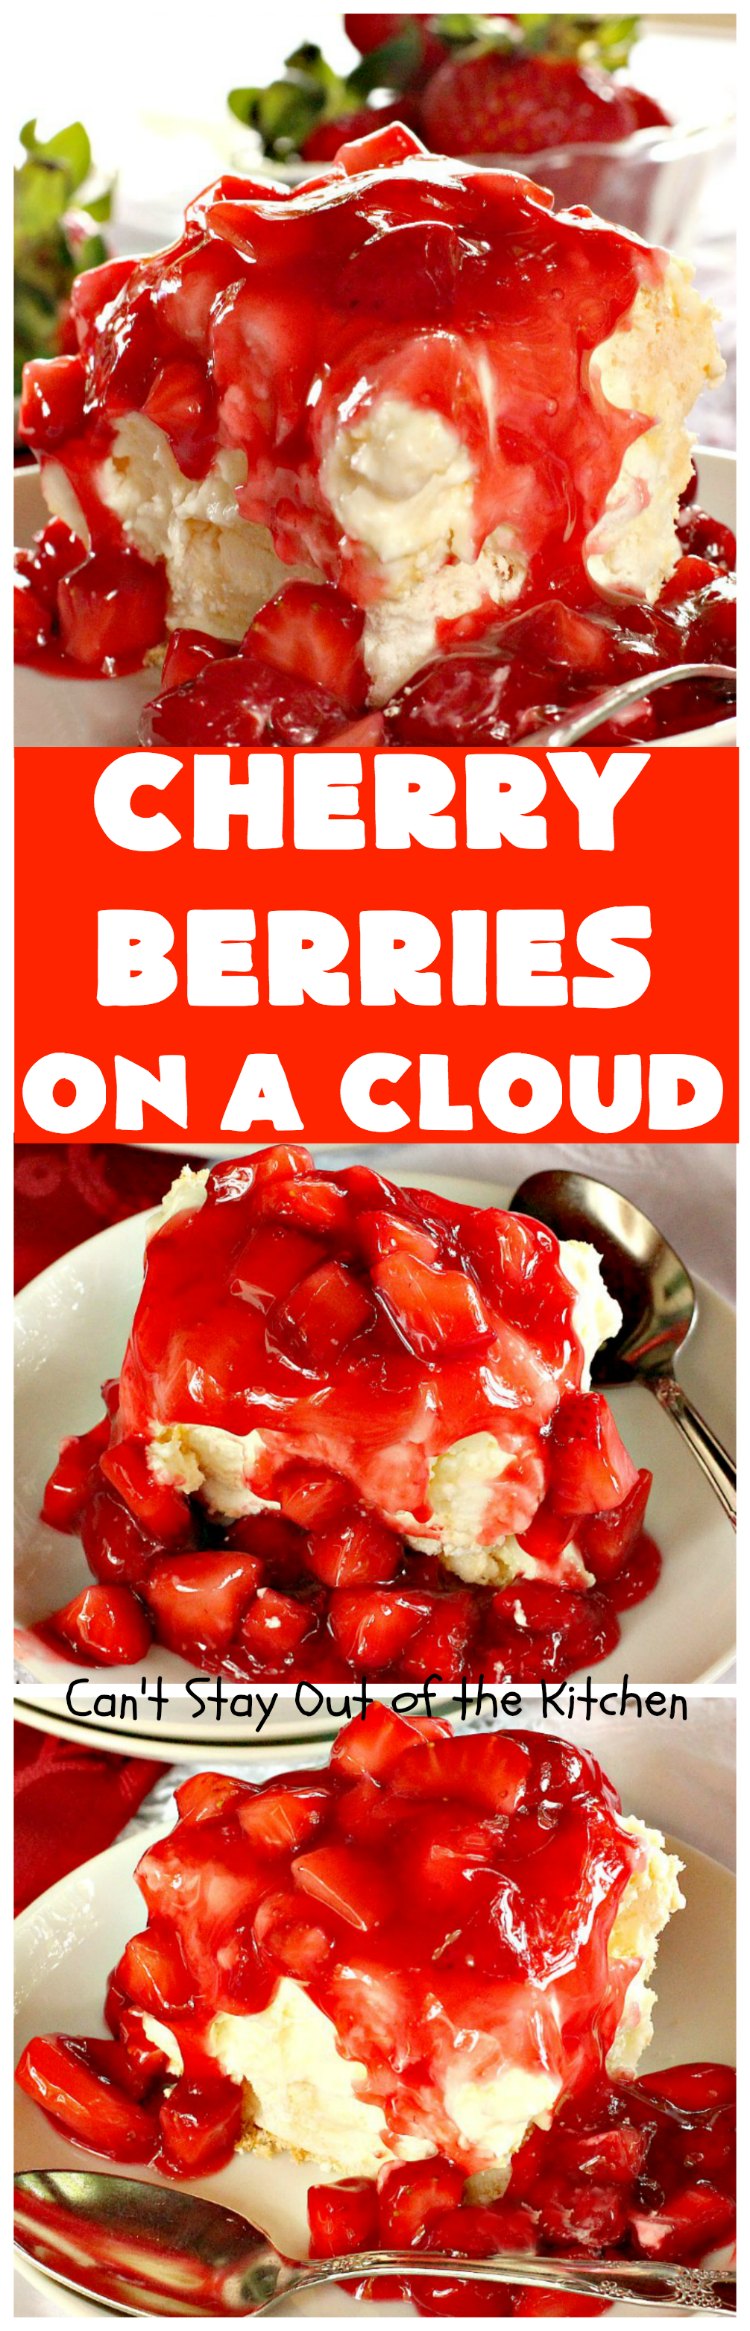 Cherry Berries On A Cloud | Can't Stay Out of the Kitchen